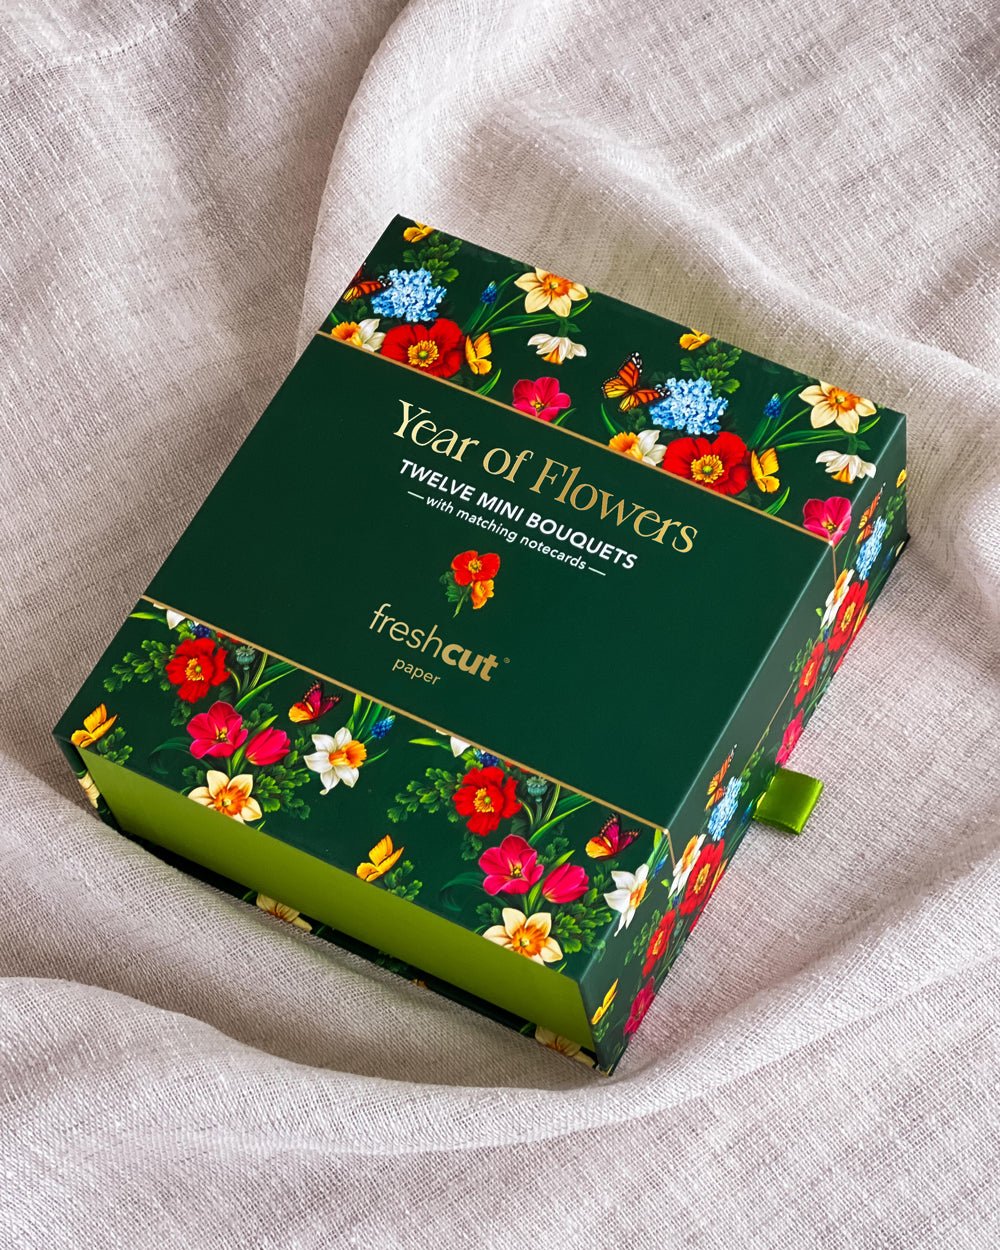 Year of Flowers Boxed Set of 12 - FreshCut Paper